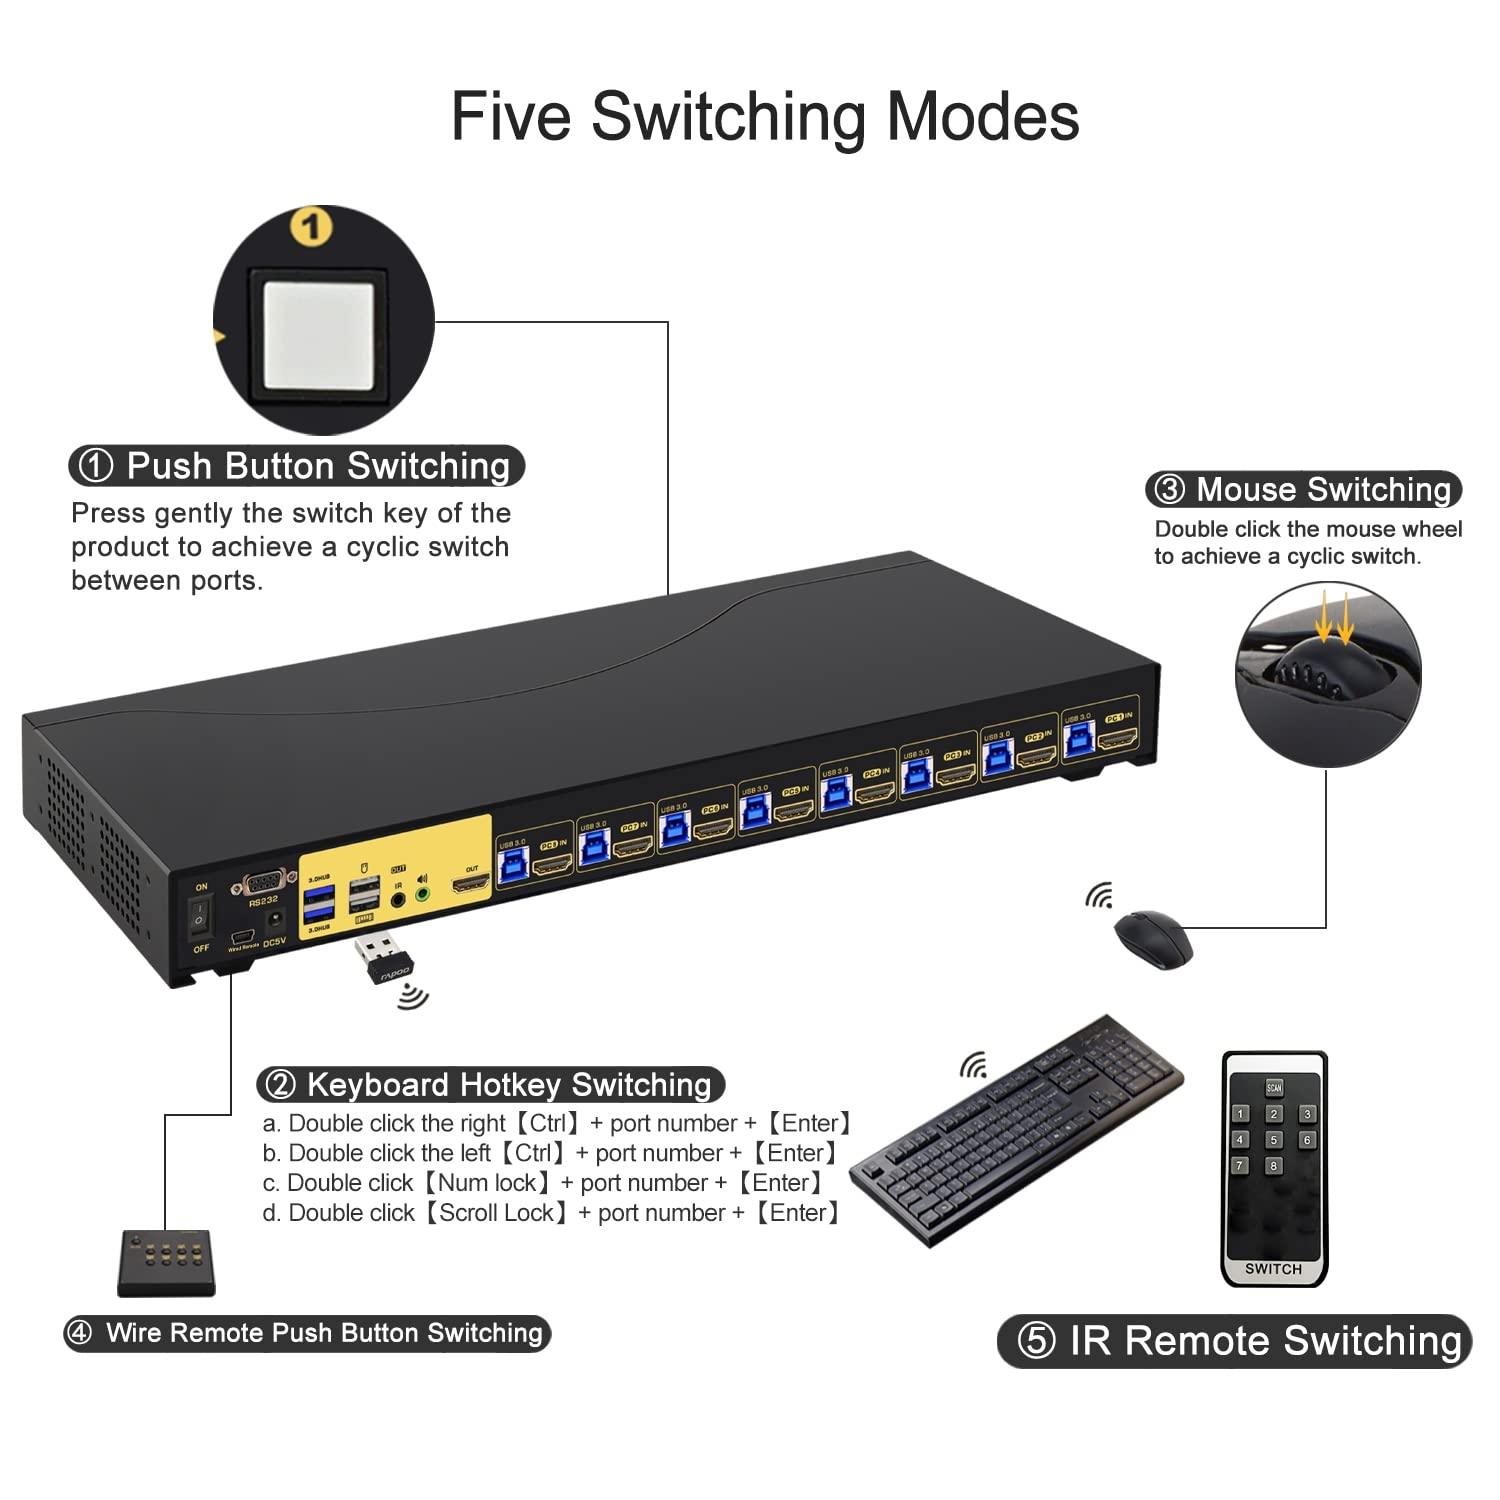 CKL 8 Port Rack Mount USB 3.0 KVM Switch HDMI 4K@60Hz with Audio, Cables and 2 Extra USB 3.0 Hub for 16 Computers Sharing Single Monitor (CKL-9138H-3) - CKL KVM Switches